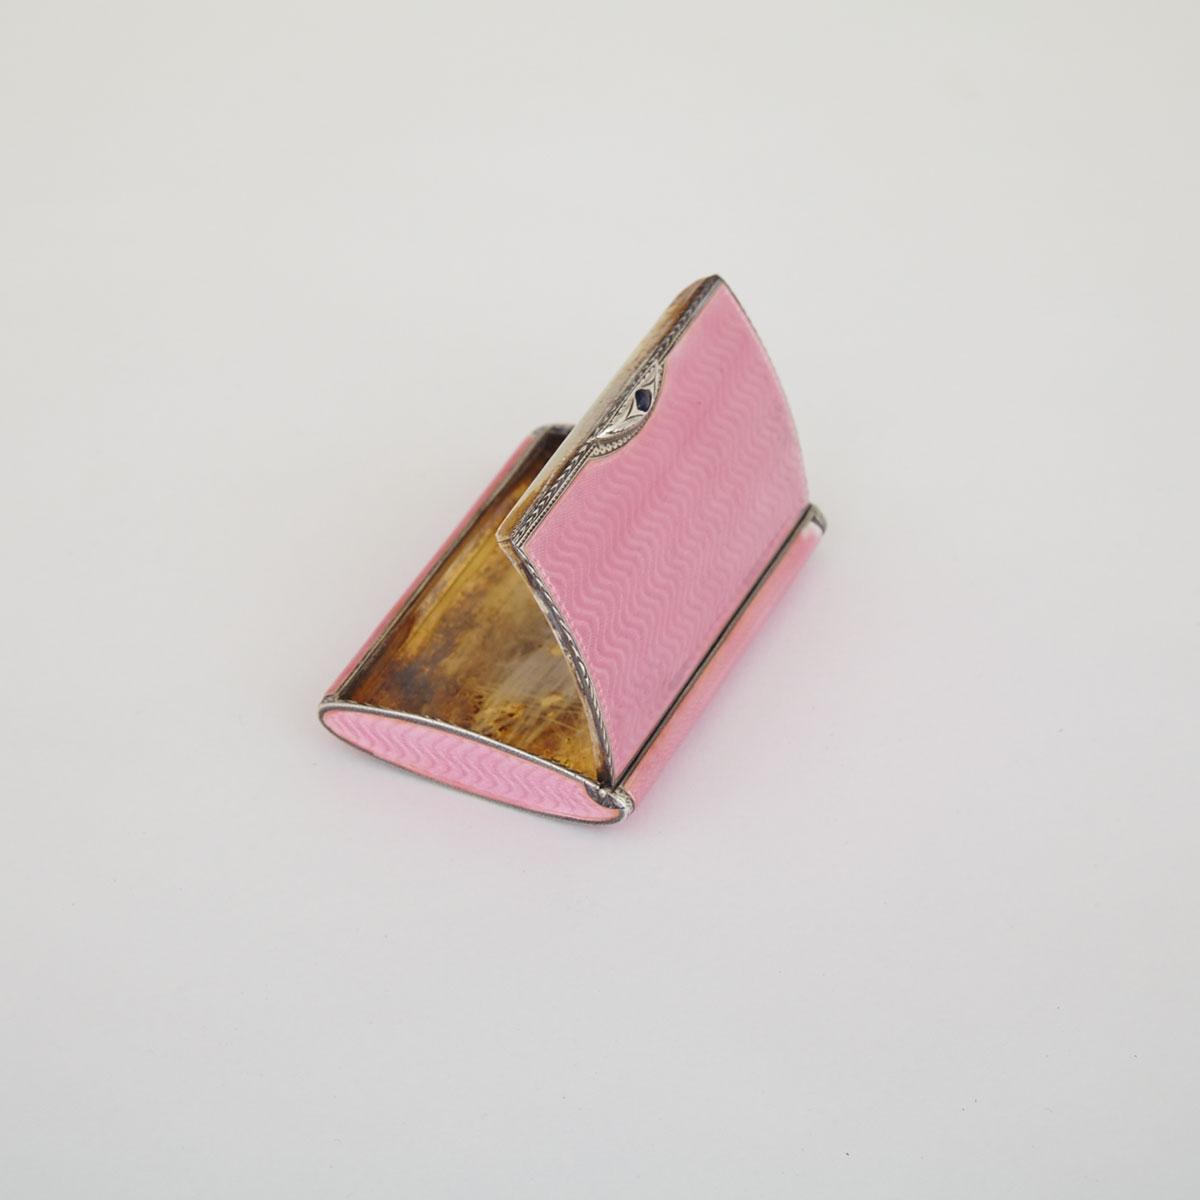 Continental Silver and Translucent Pink Enamel Cigarette Case, early 20th century